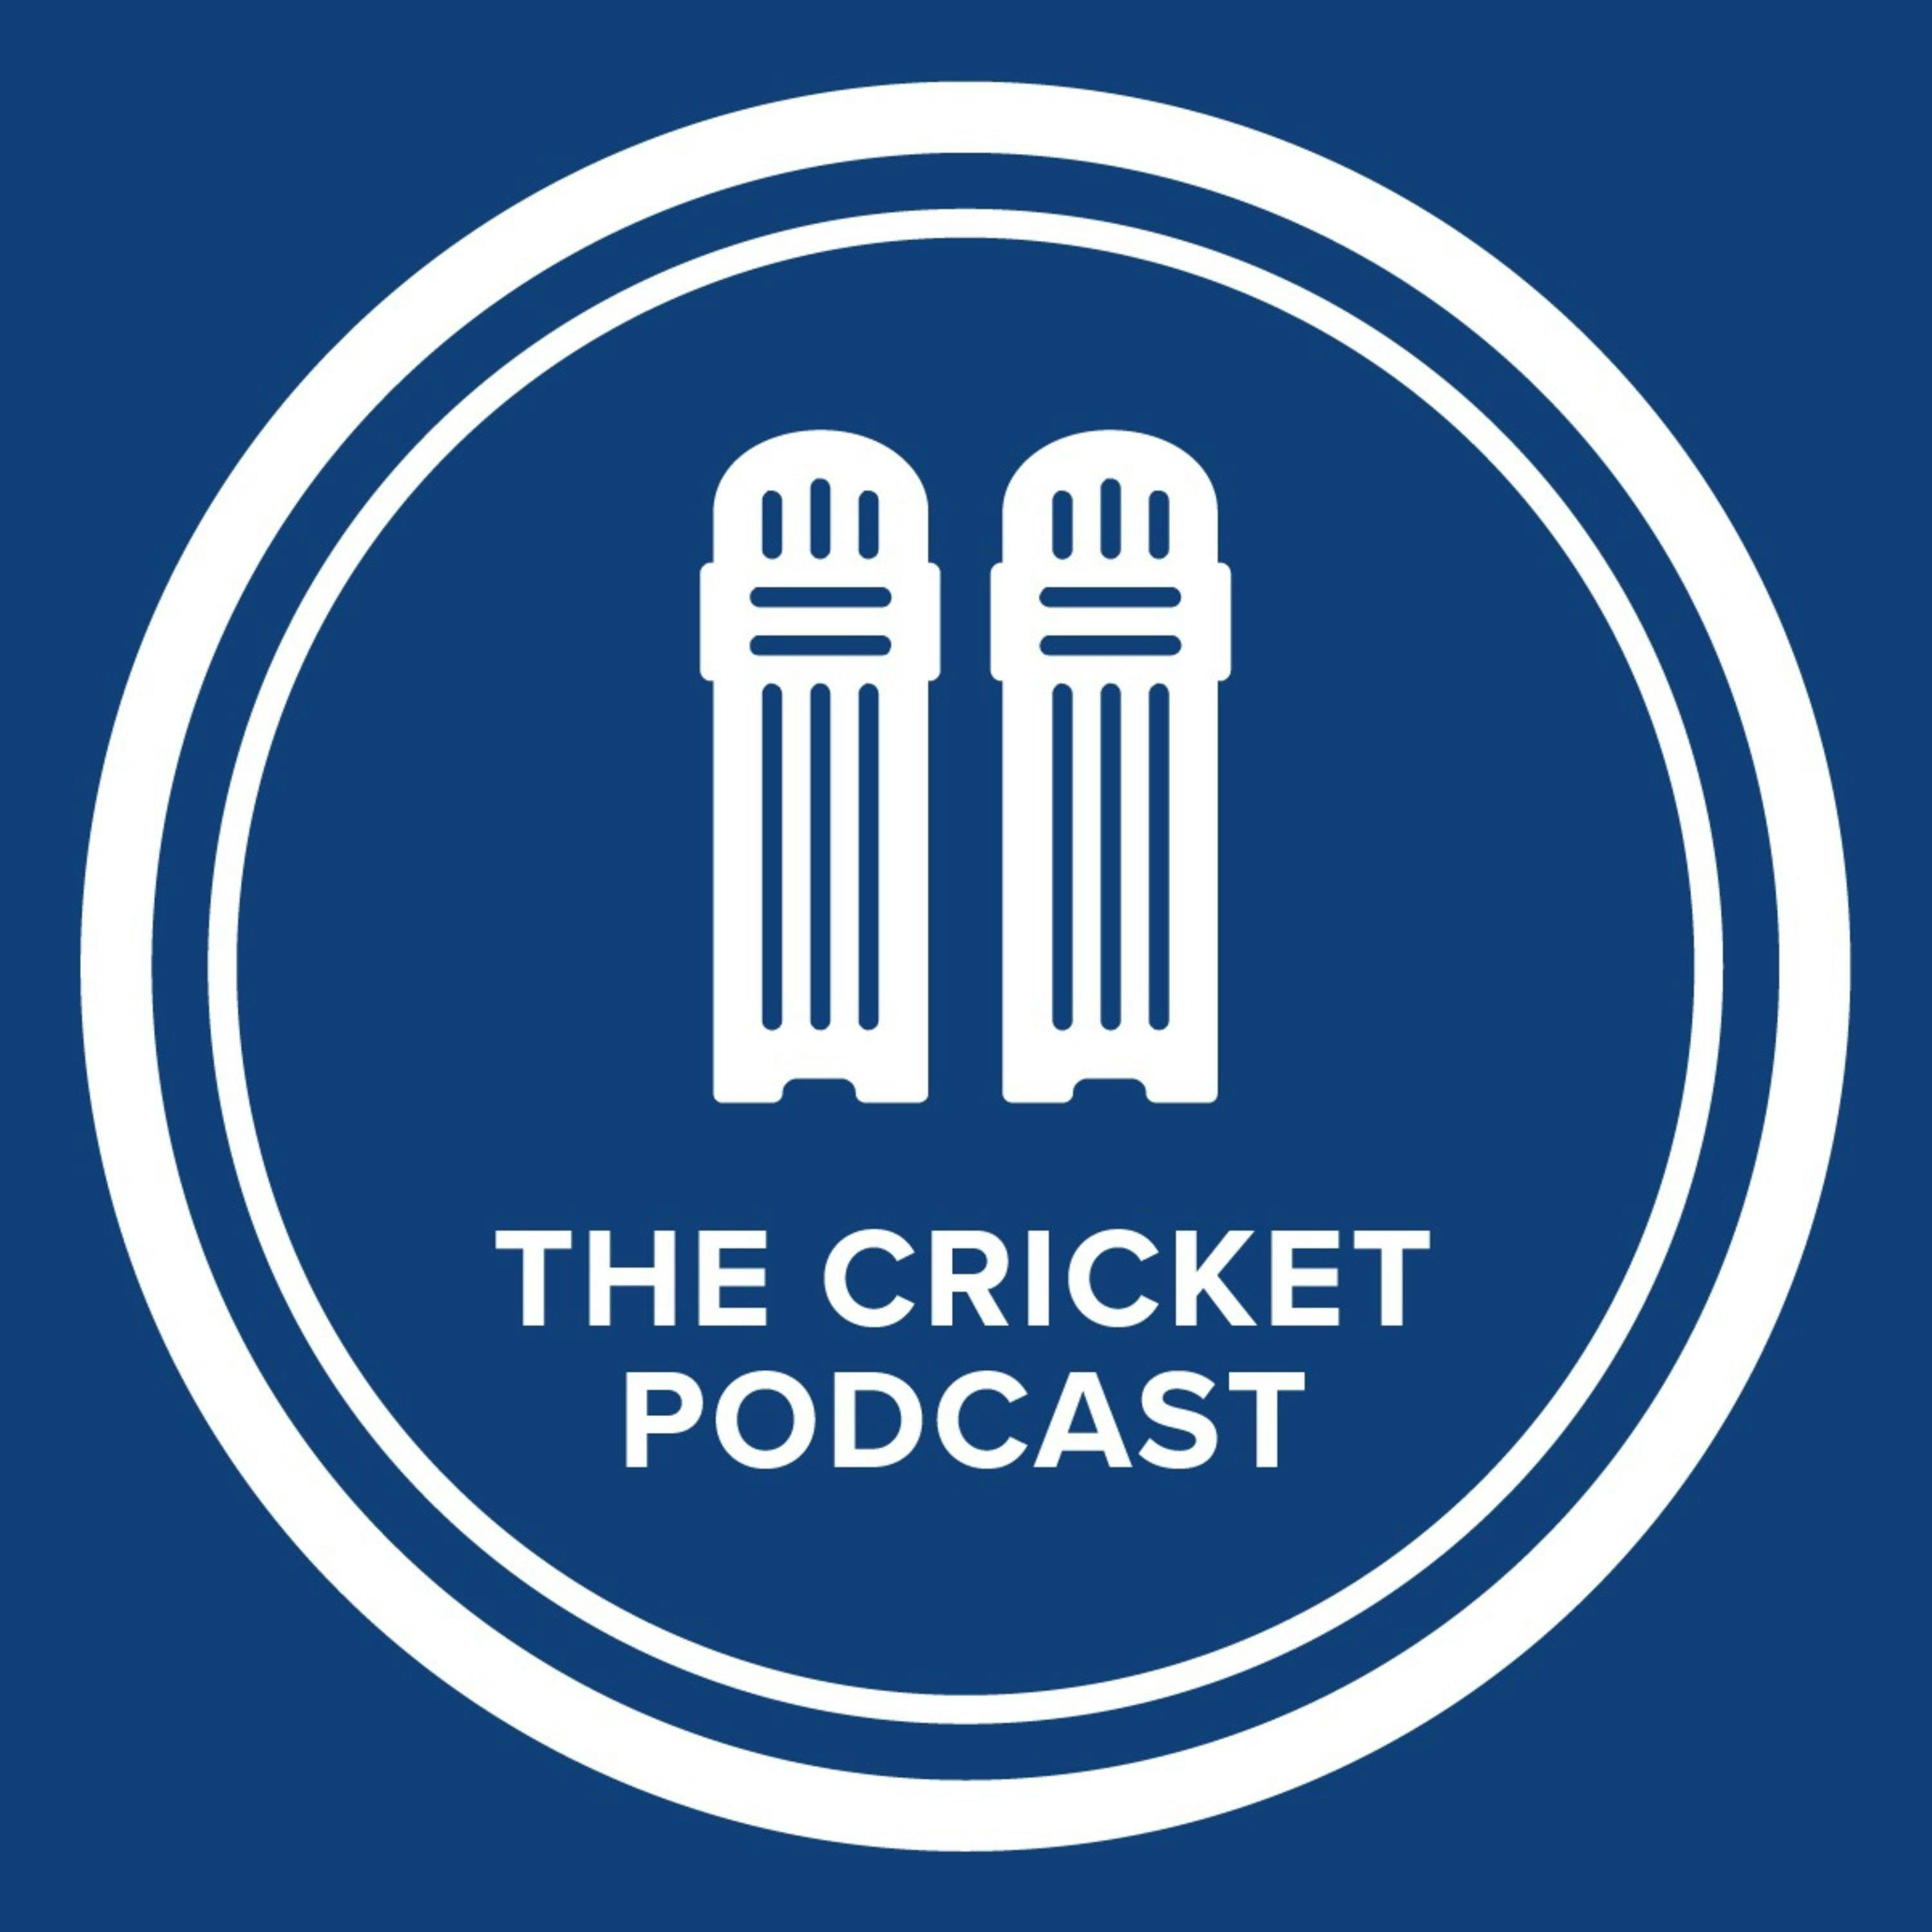 IPL Review- The IPL’s Biggest Failures, Top Players and a Q&A (feat. Dan Weston)